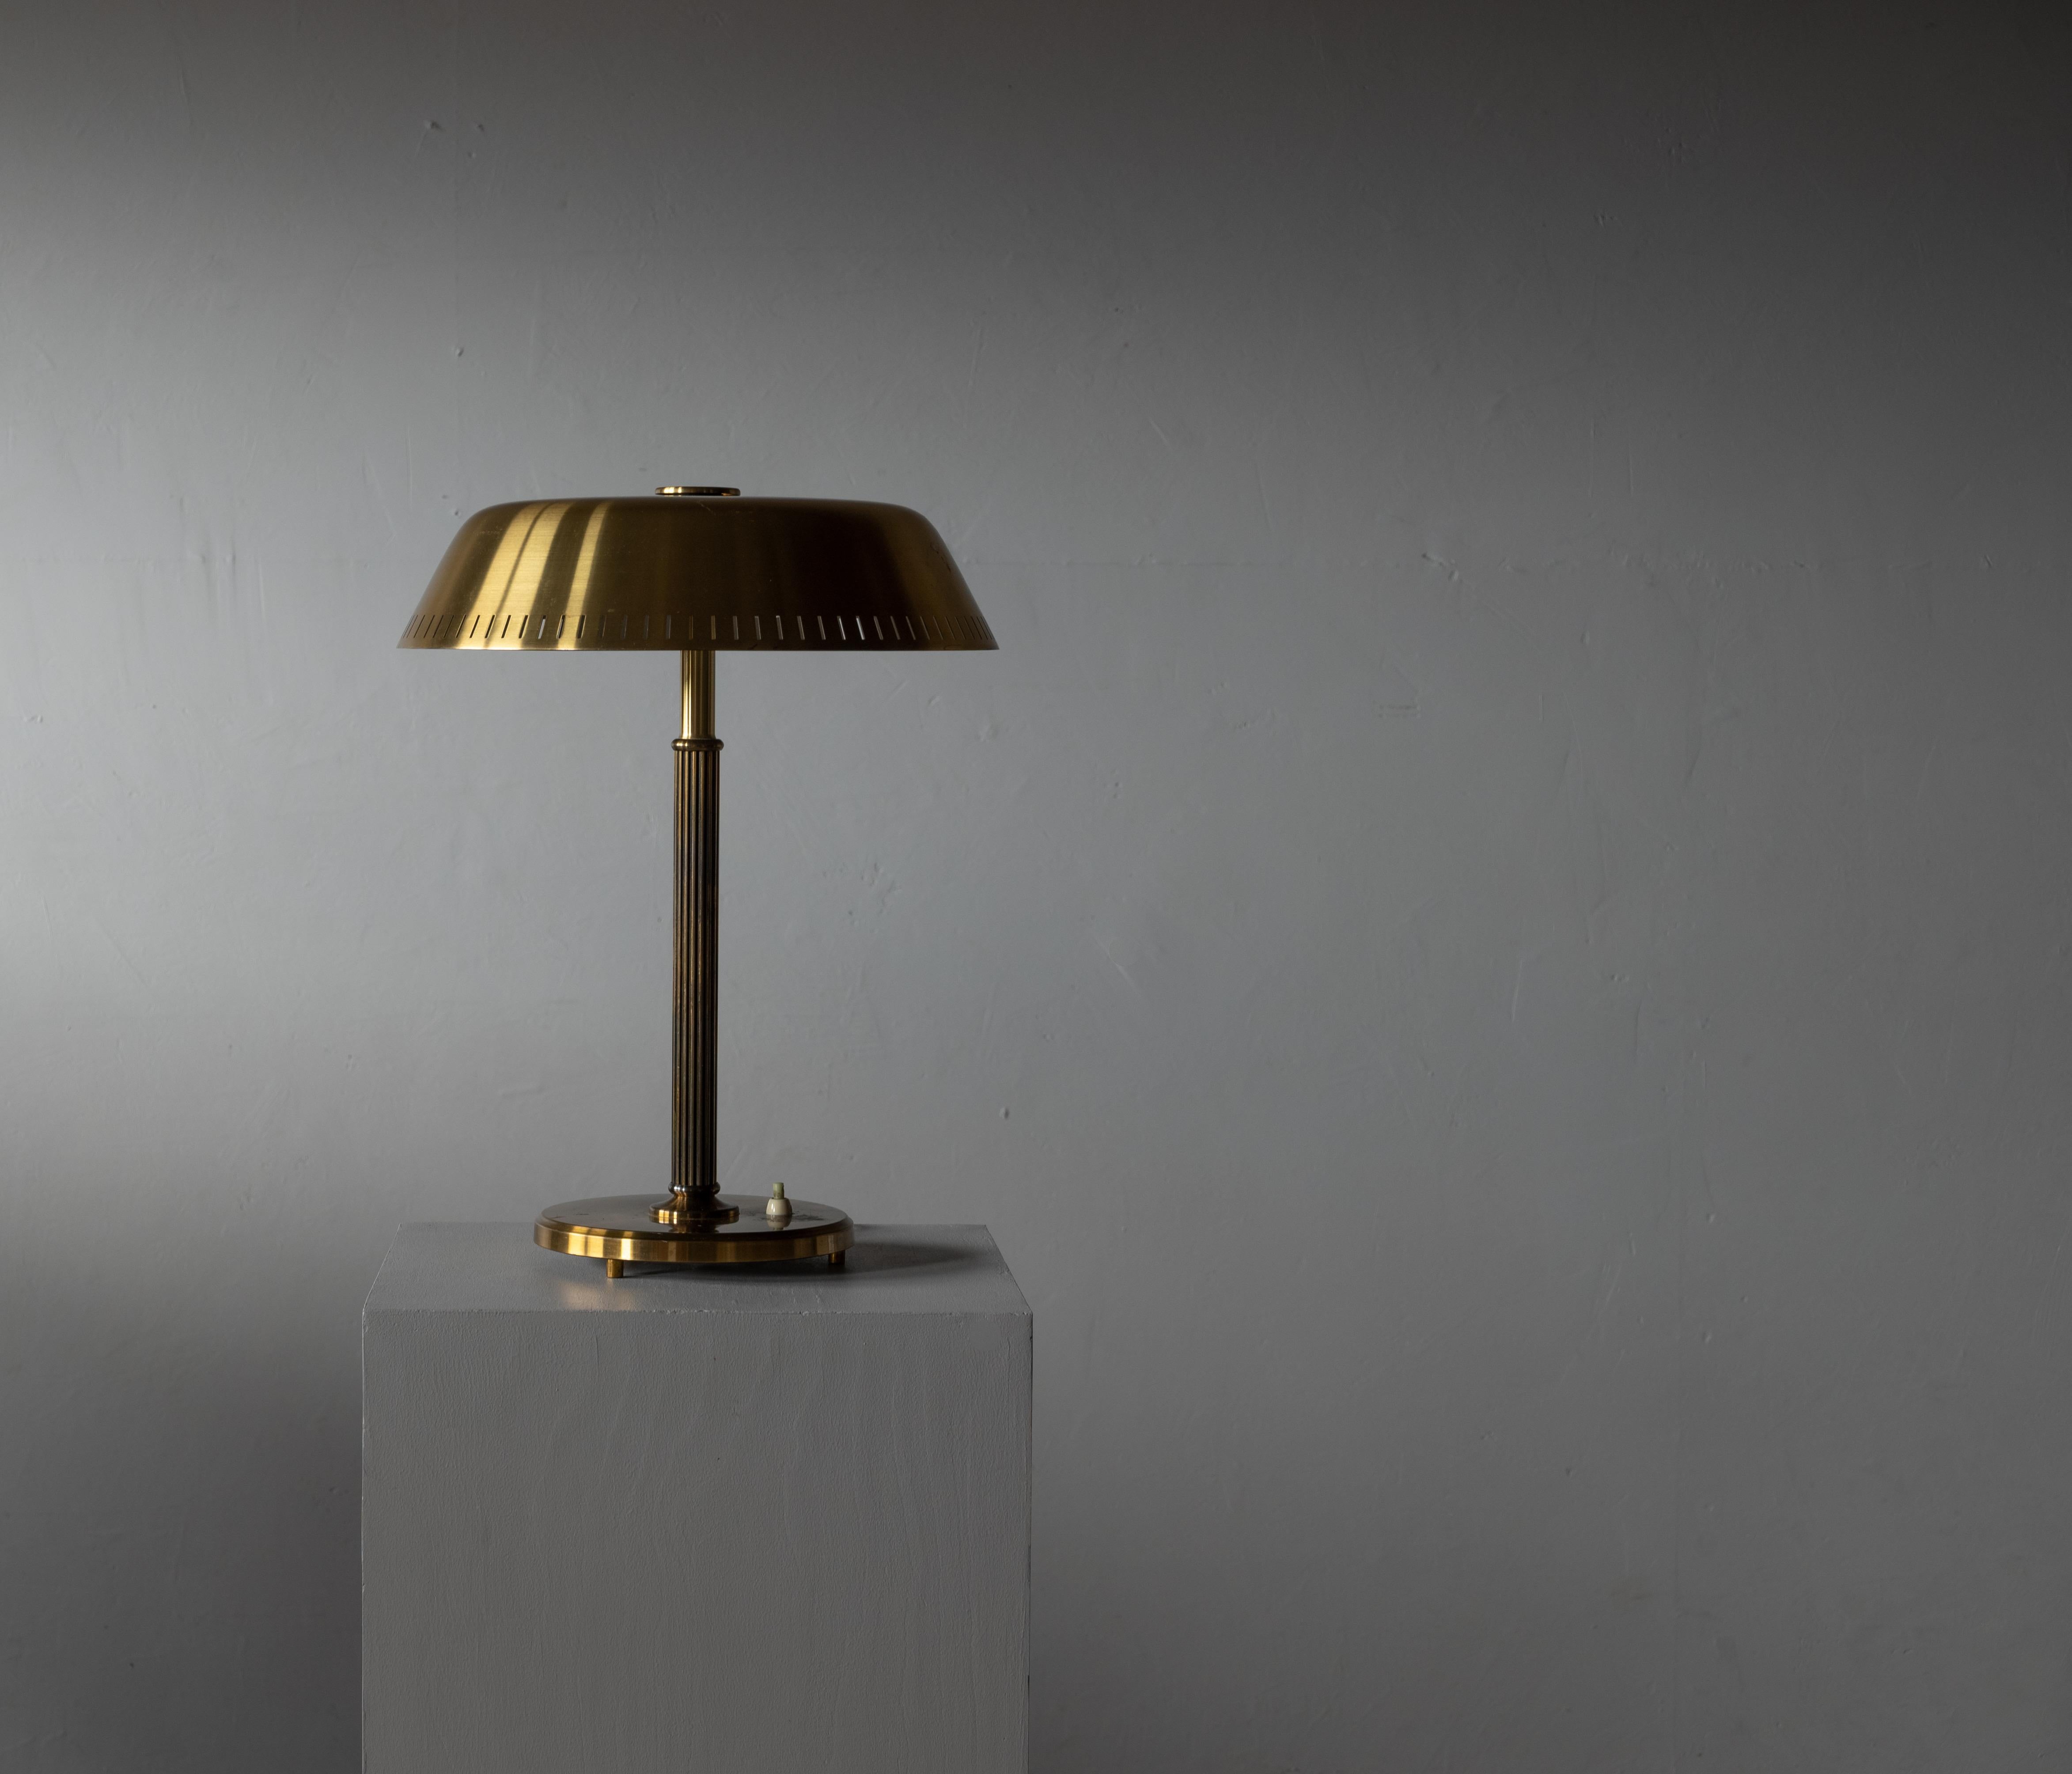 A table lamp. Designed and production attributed to Böhlmarks, Sweden, 1940s. In brass. 

Features fine details such as a perforated lampshade and fluted rod. Brass has retained beautiful patina.

Other designers of the period include Jean